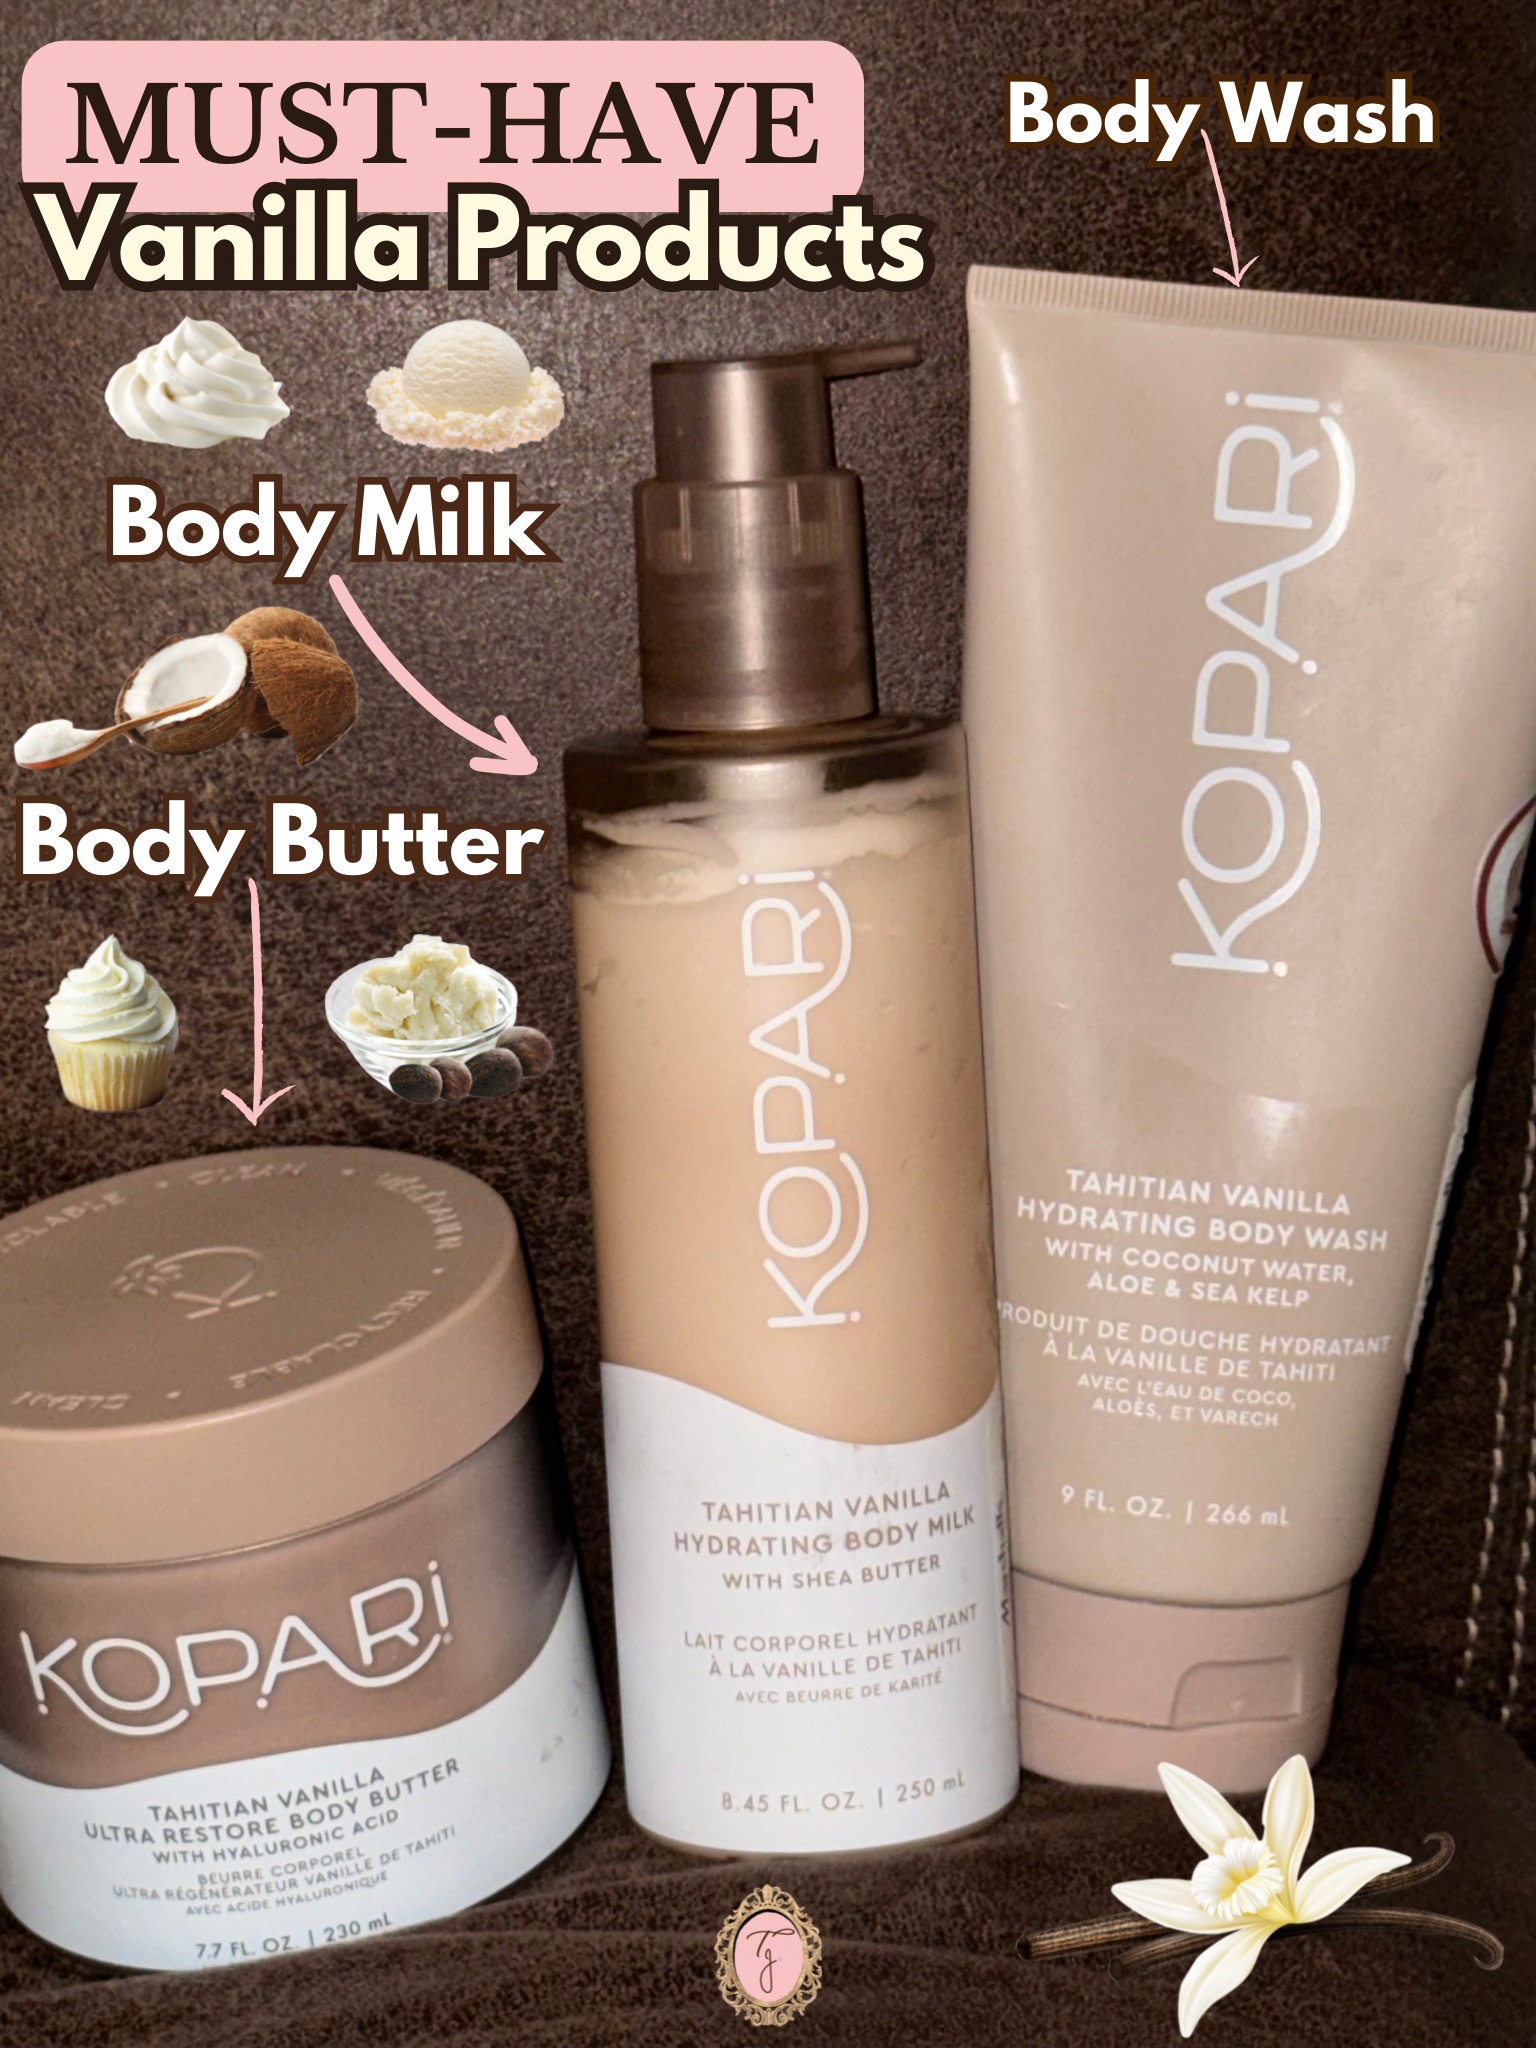 The Best Vanilla Body Care Products at TJ Maxx